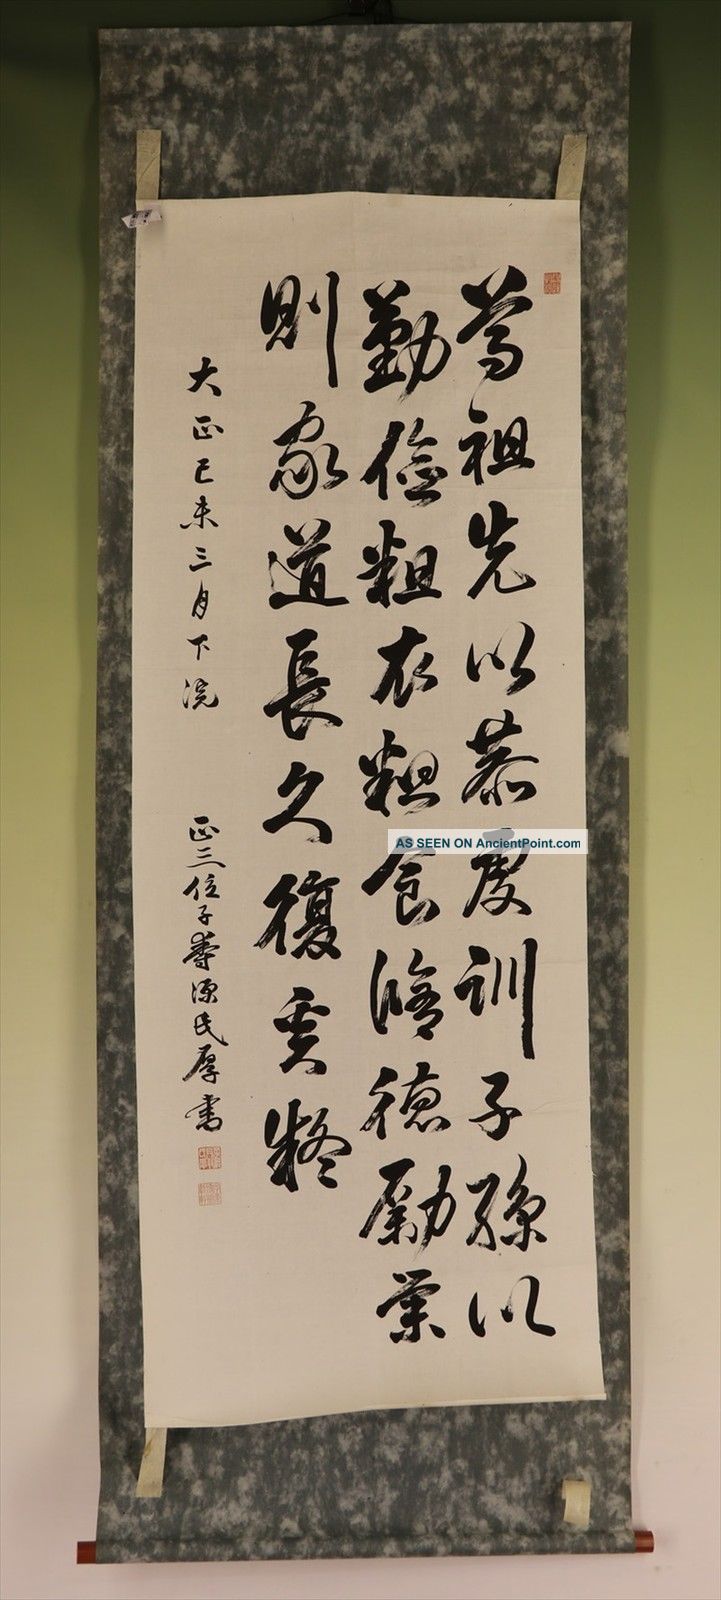 Japanese Hanging Scroll Calligraphy E144 Paintings & Scrolls photo